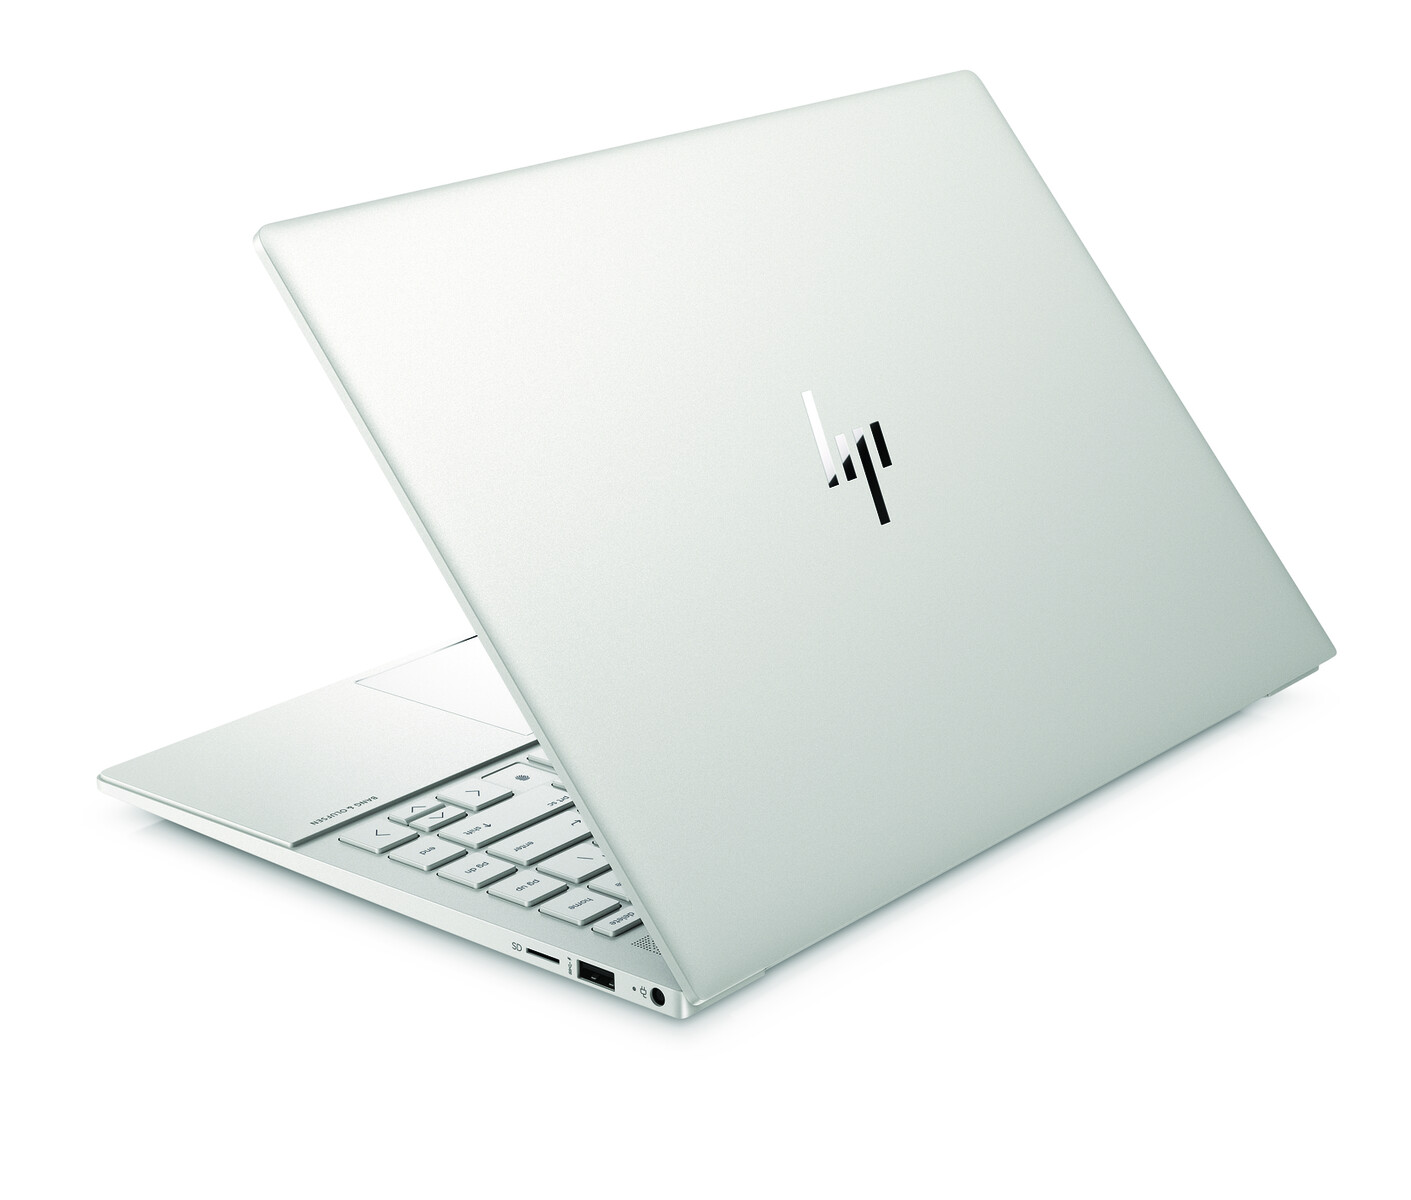 csm HP ENVY 14 RearLeft 8 8ca9ce7968 CES 2021: HP introduces Envy 14, their first 14-inch colour-calibrated laptop